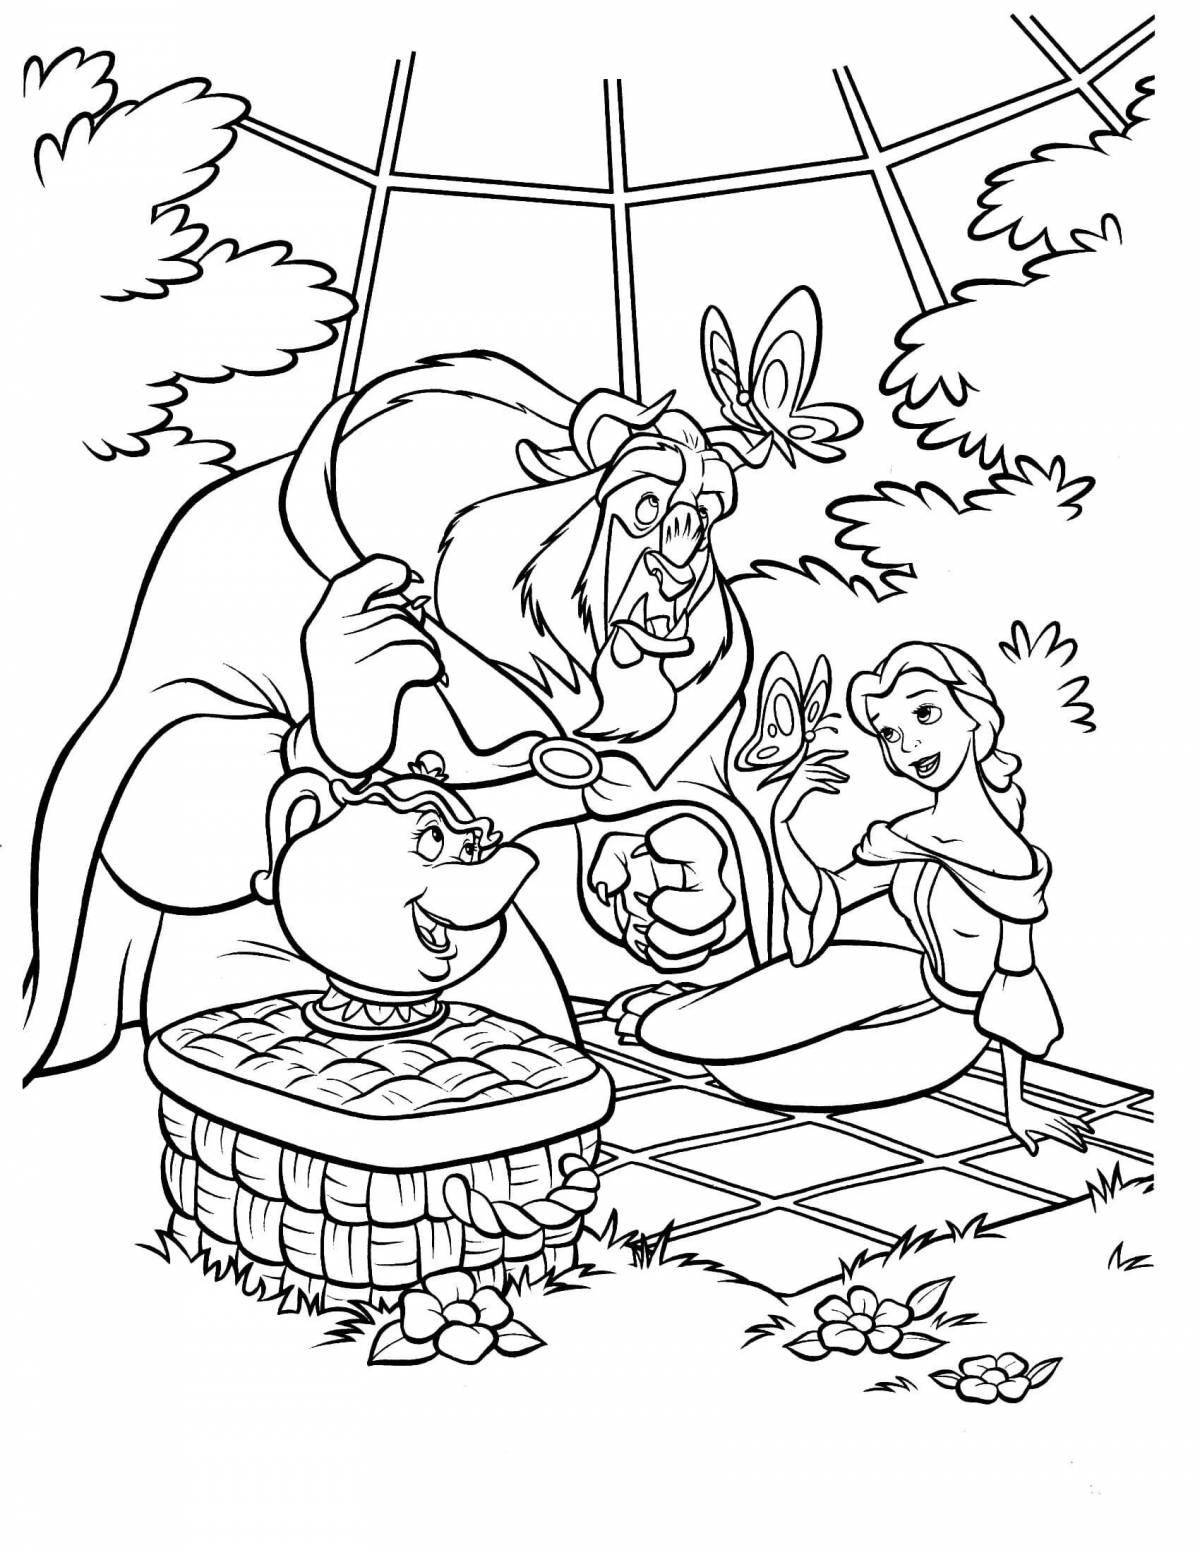 Exotic fairy tale coloring book for girls